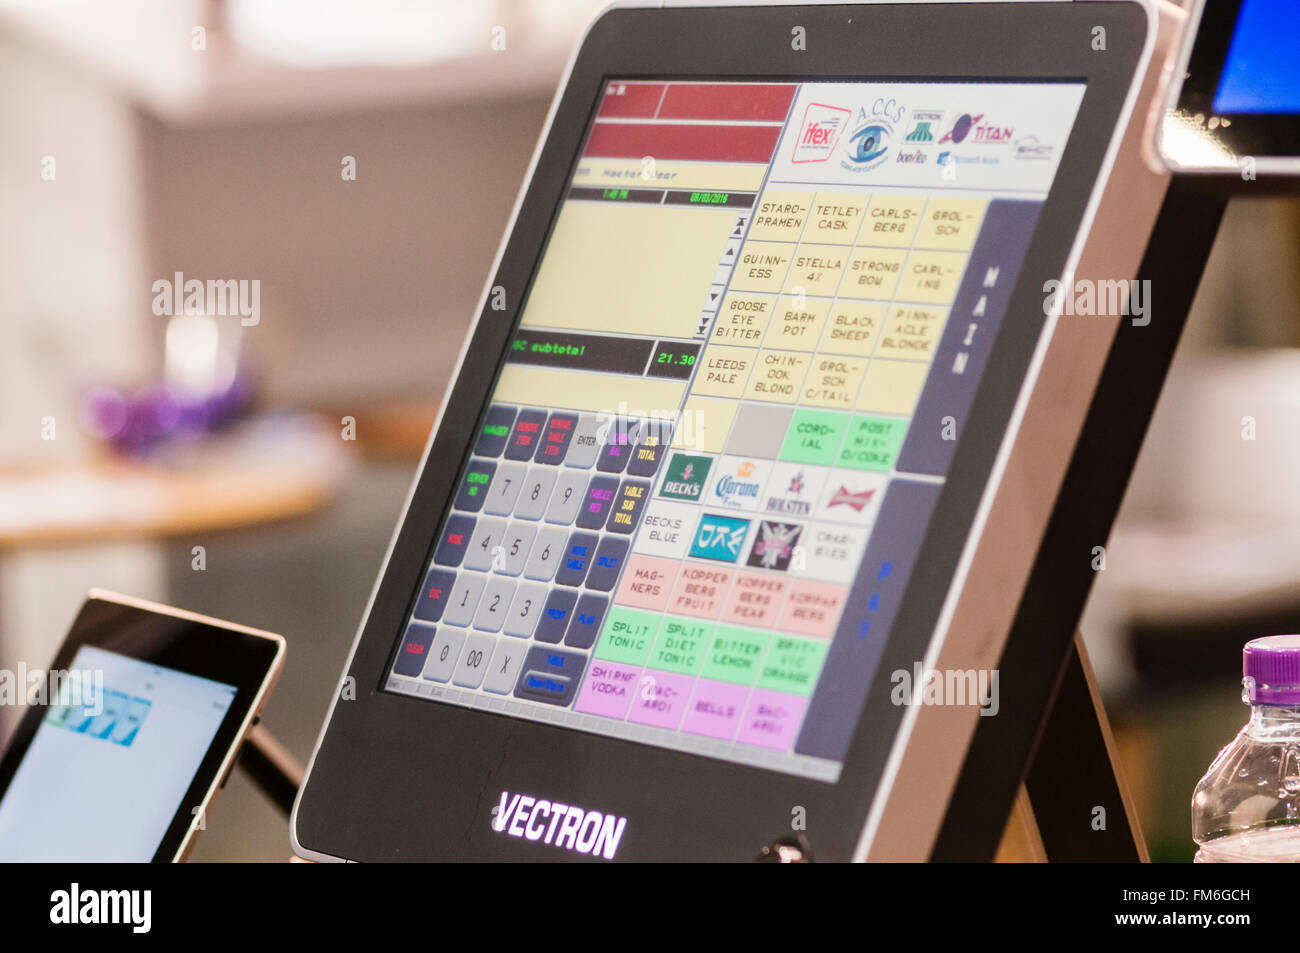 Electronic Point of Sale terminal in a restaurant. Stock Photo